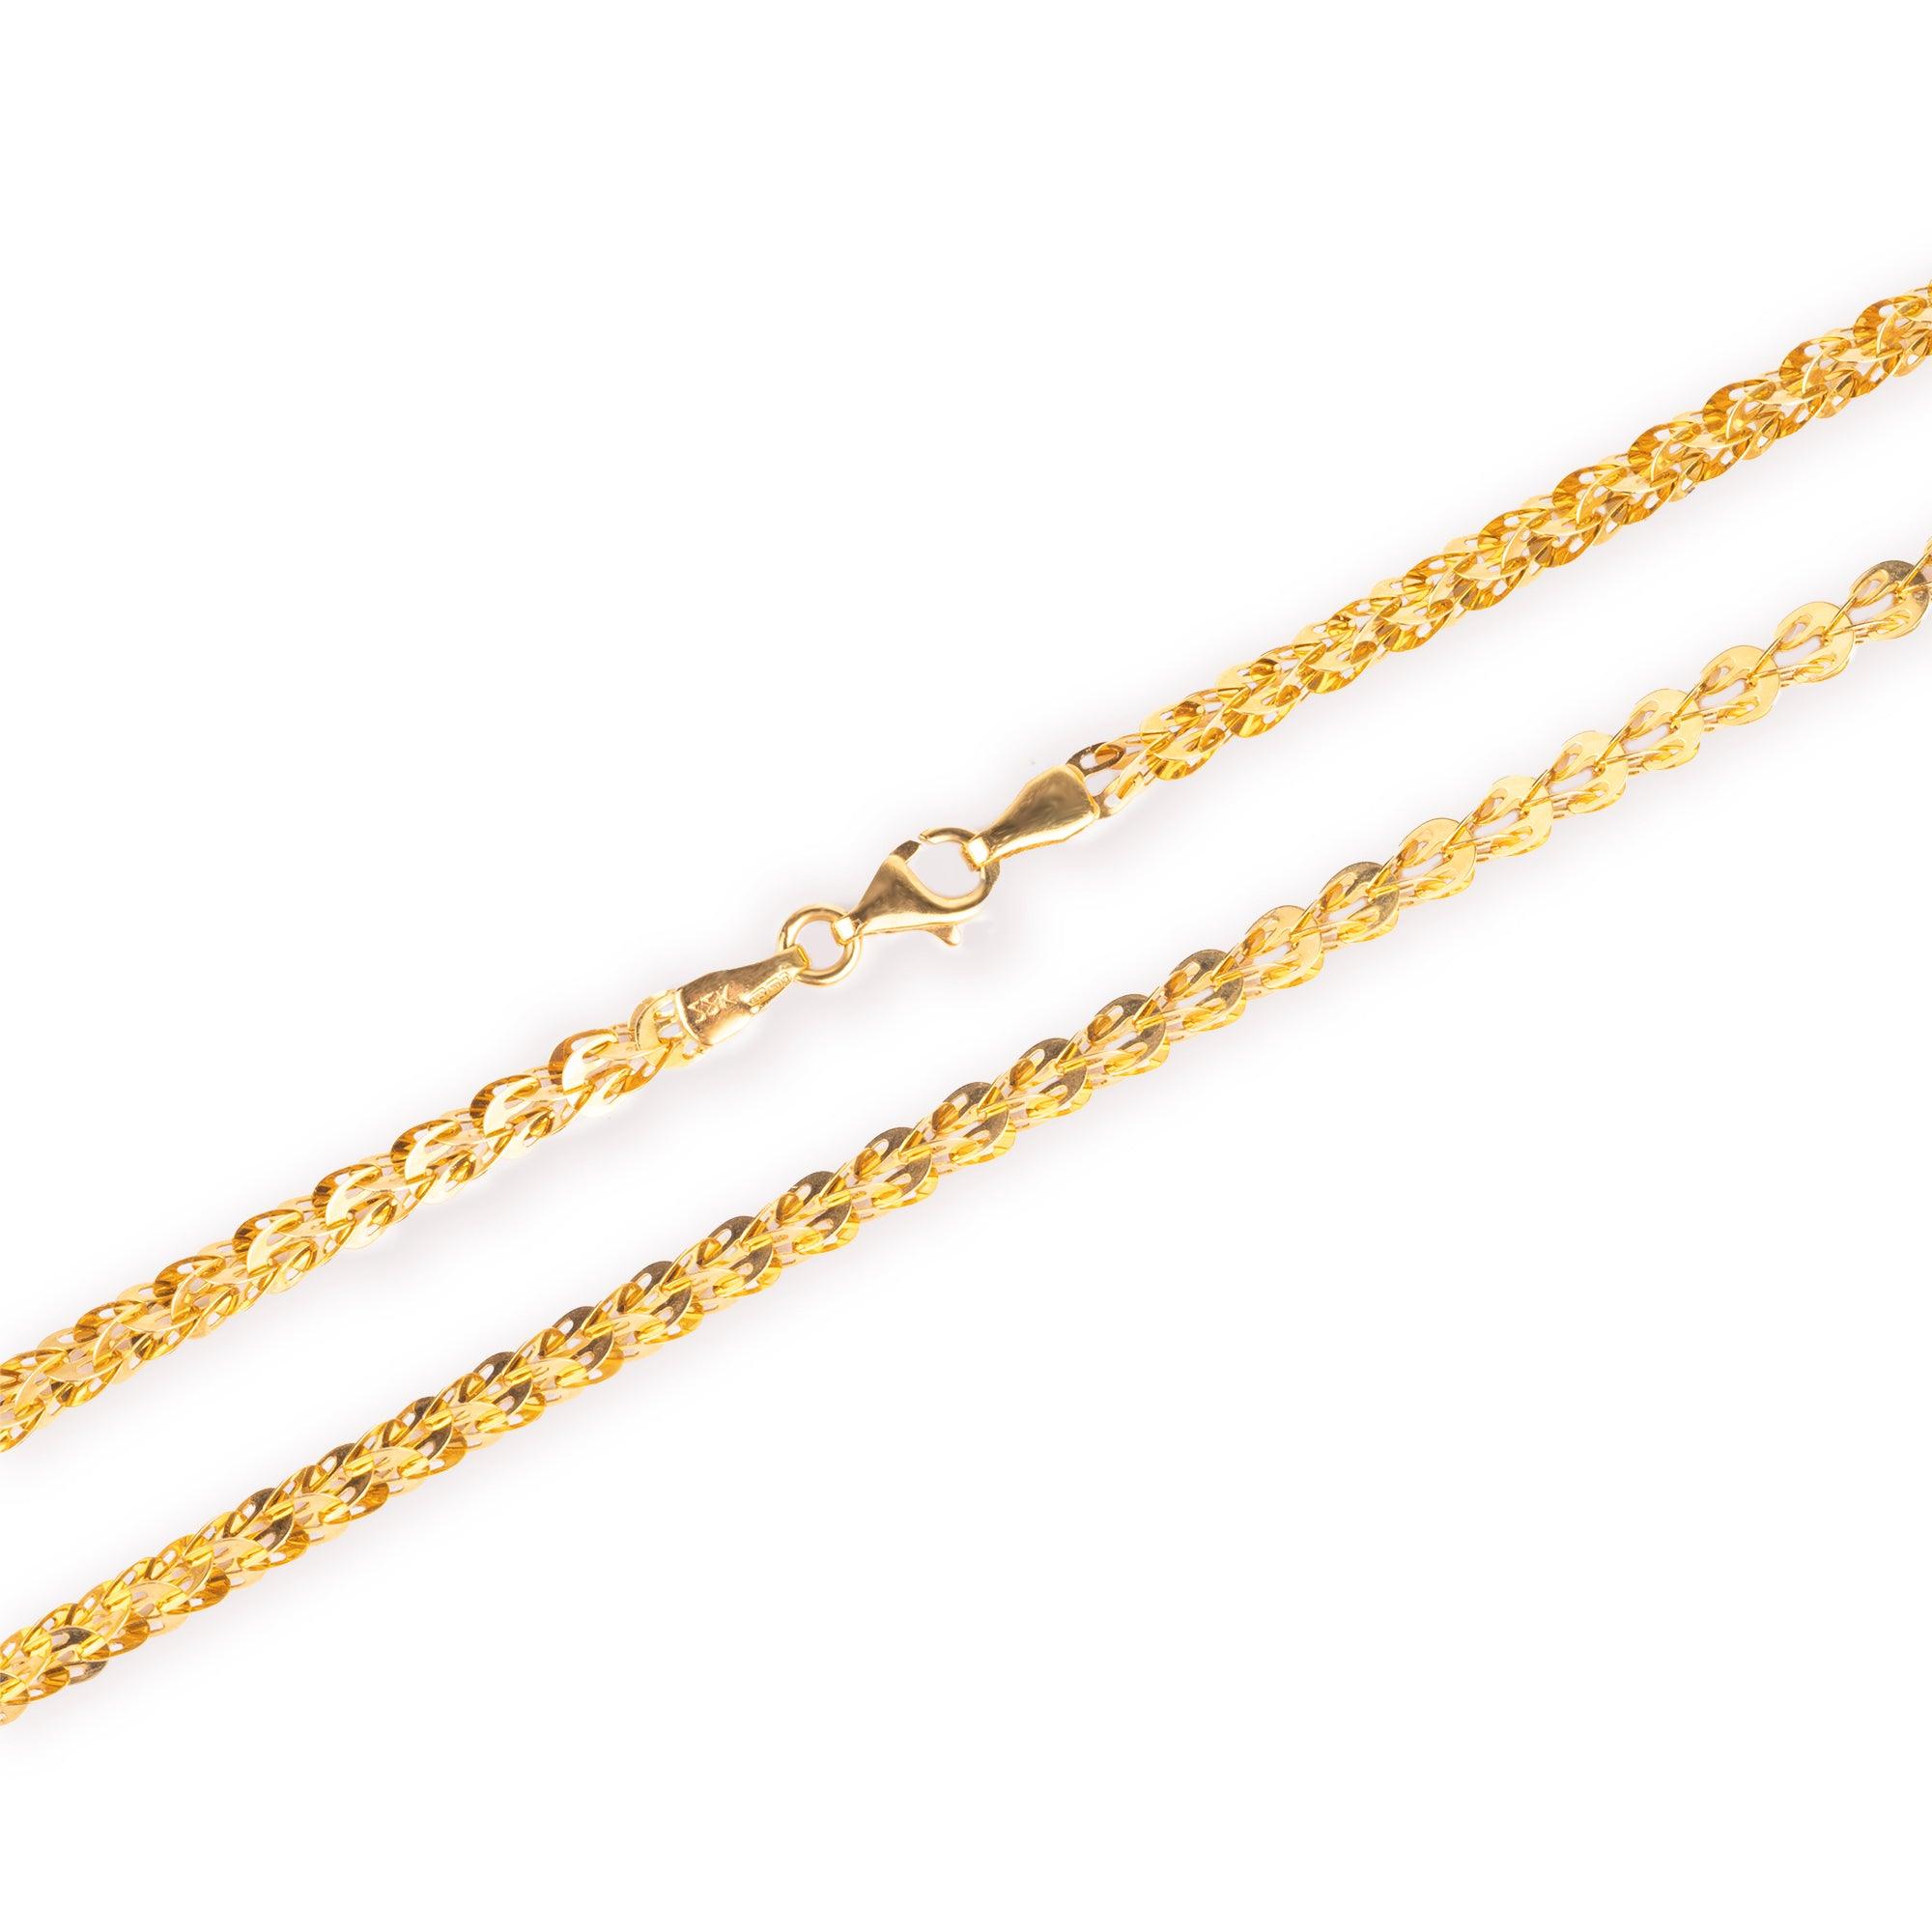 22ct Gold Dragon Scale Chain with Interwoven Links and Lobster Clasp (12g) C-8201